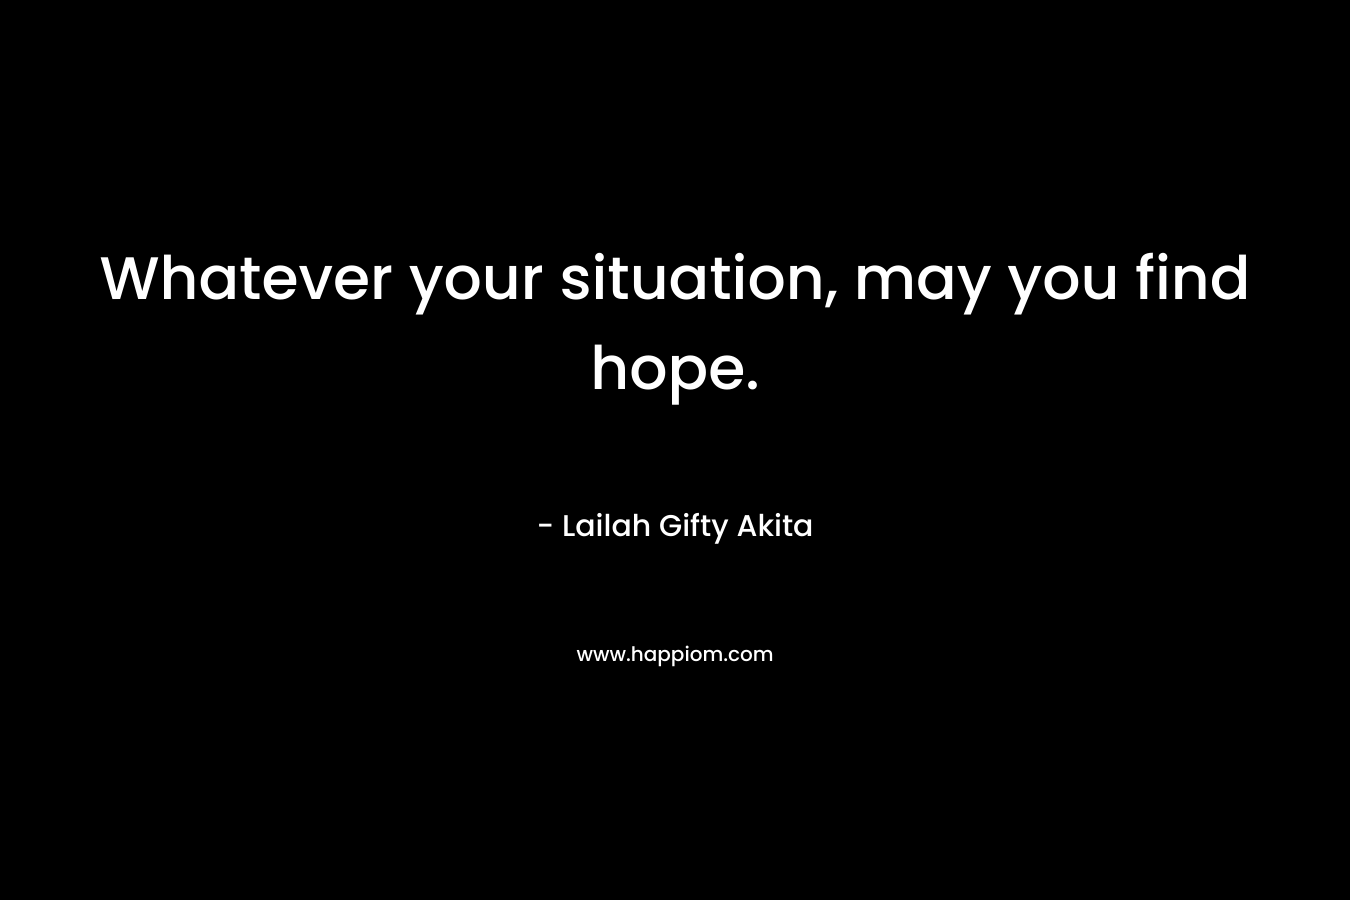 Whatever your situation, may you find hope.